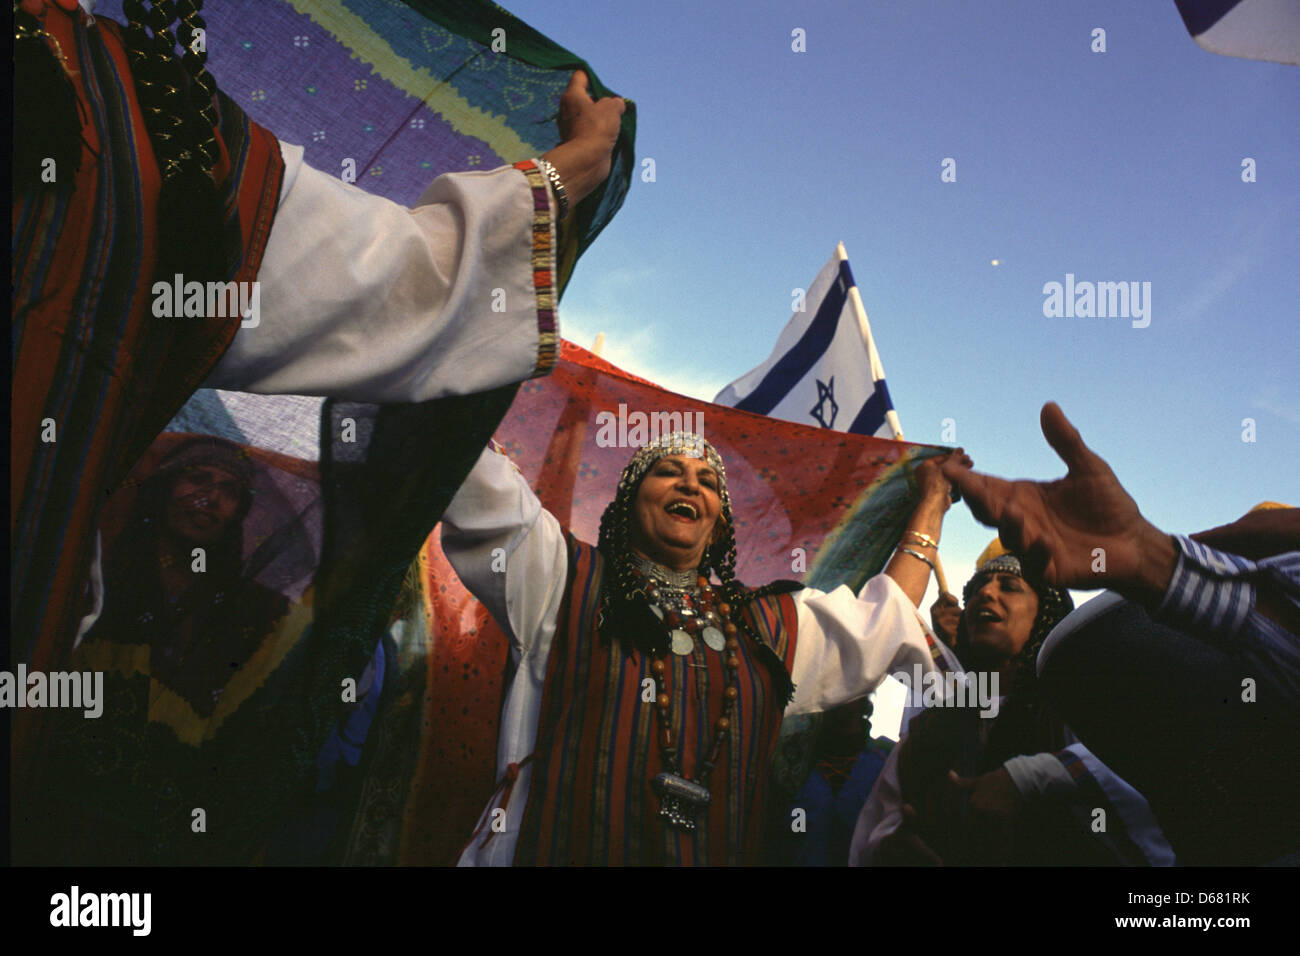 Members of the Yemeni Jewish community in traditional outfit dancing during Jerusalem Day or Yom Yerushalayim an Israeli national holiday commemorating the reunification of Jerusalem and the establishment of Israeli control over the Old City in the aftermath of the June 1967 Six-Day War. Stock Photo